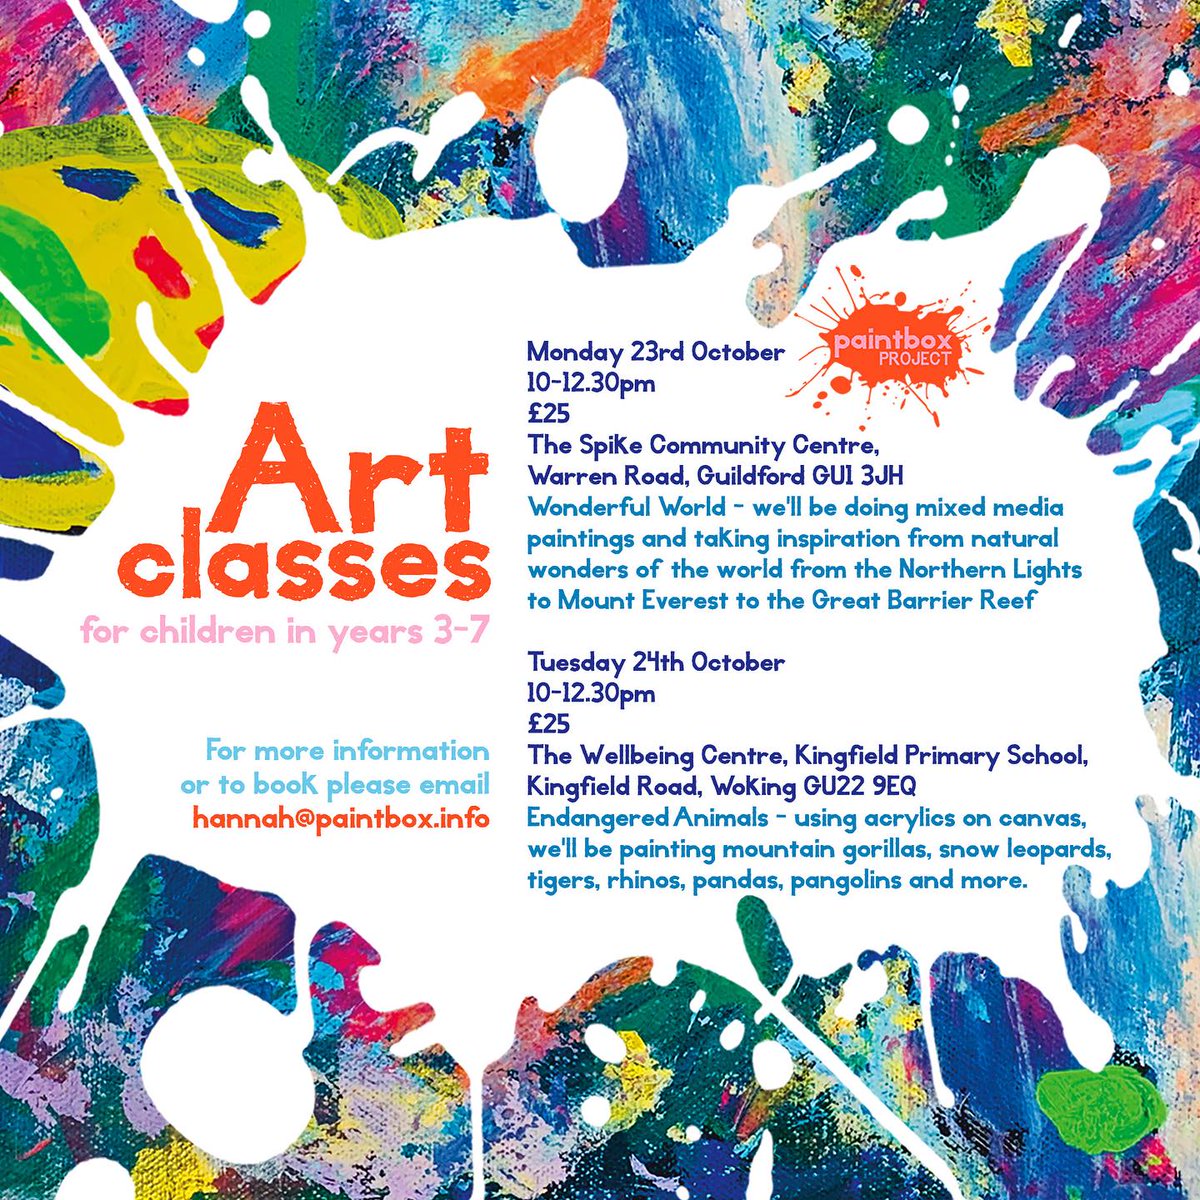 Join our arts partner @HannahPaintbox for half-term art classes! 

Contact hannah@paintbox.info for more information and to book🎨